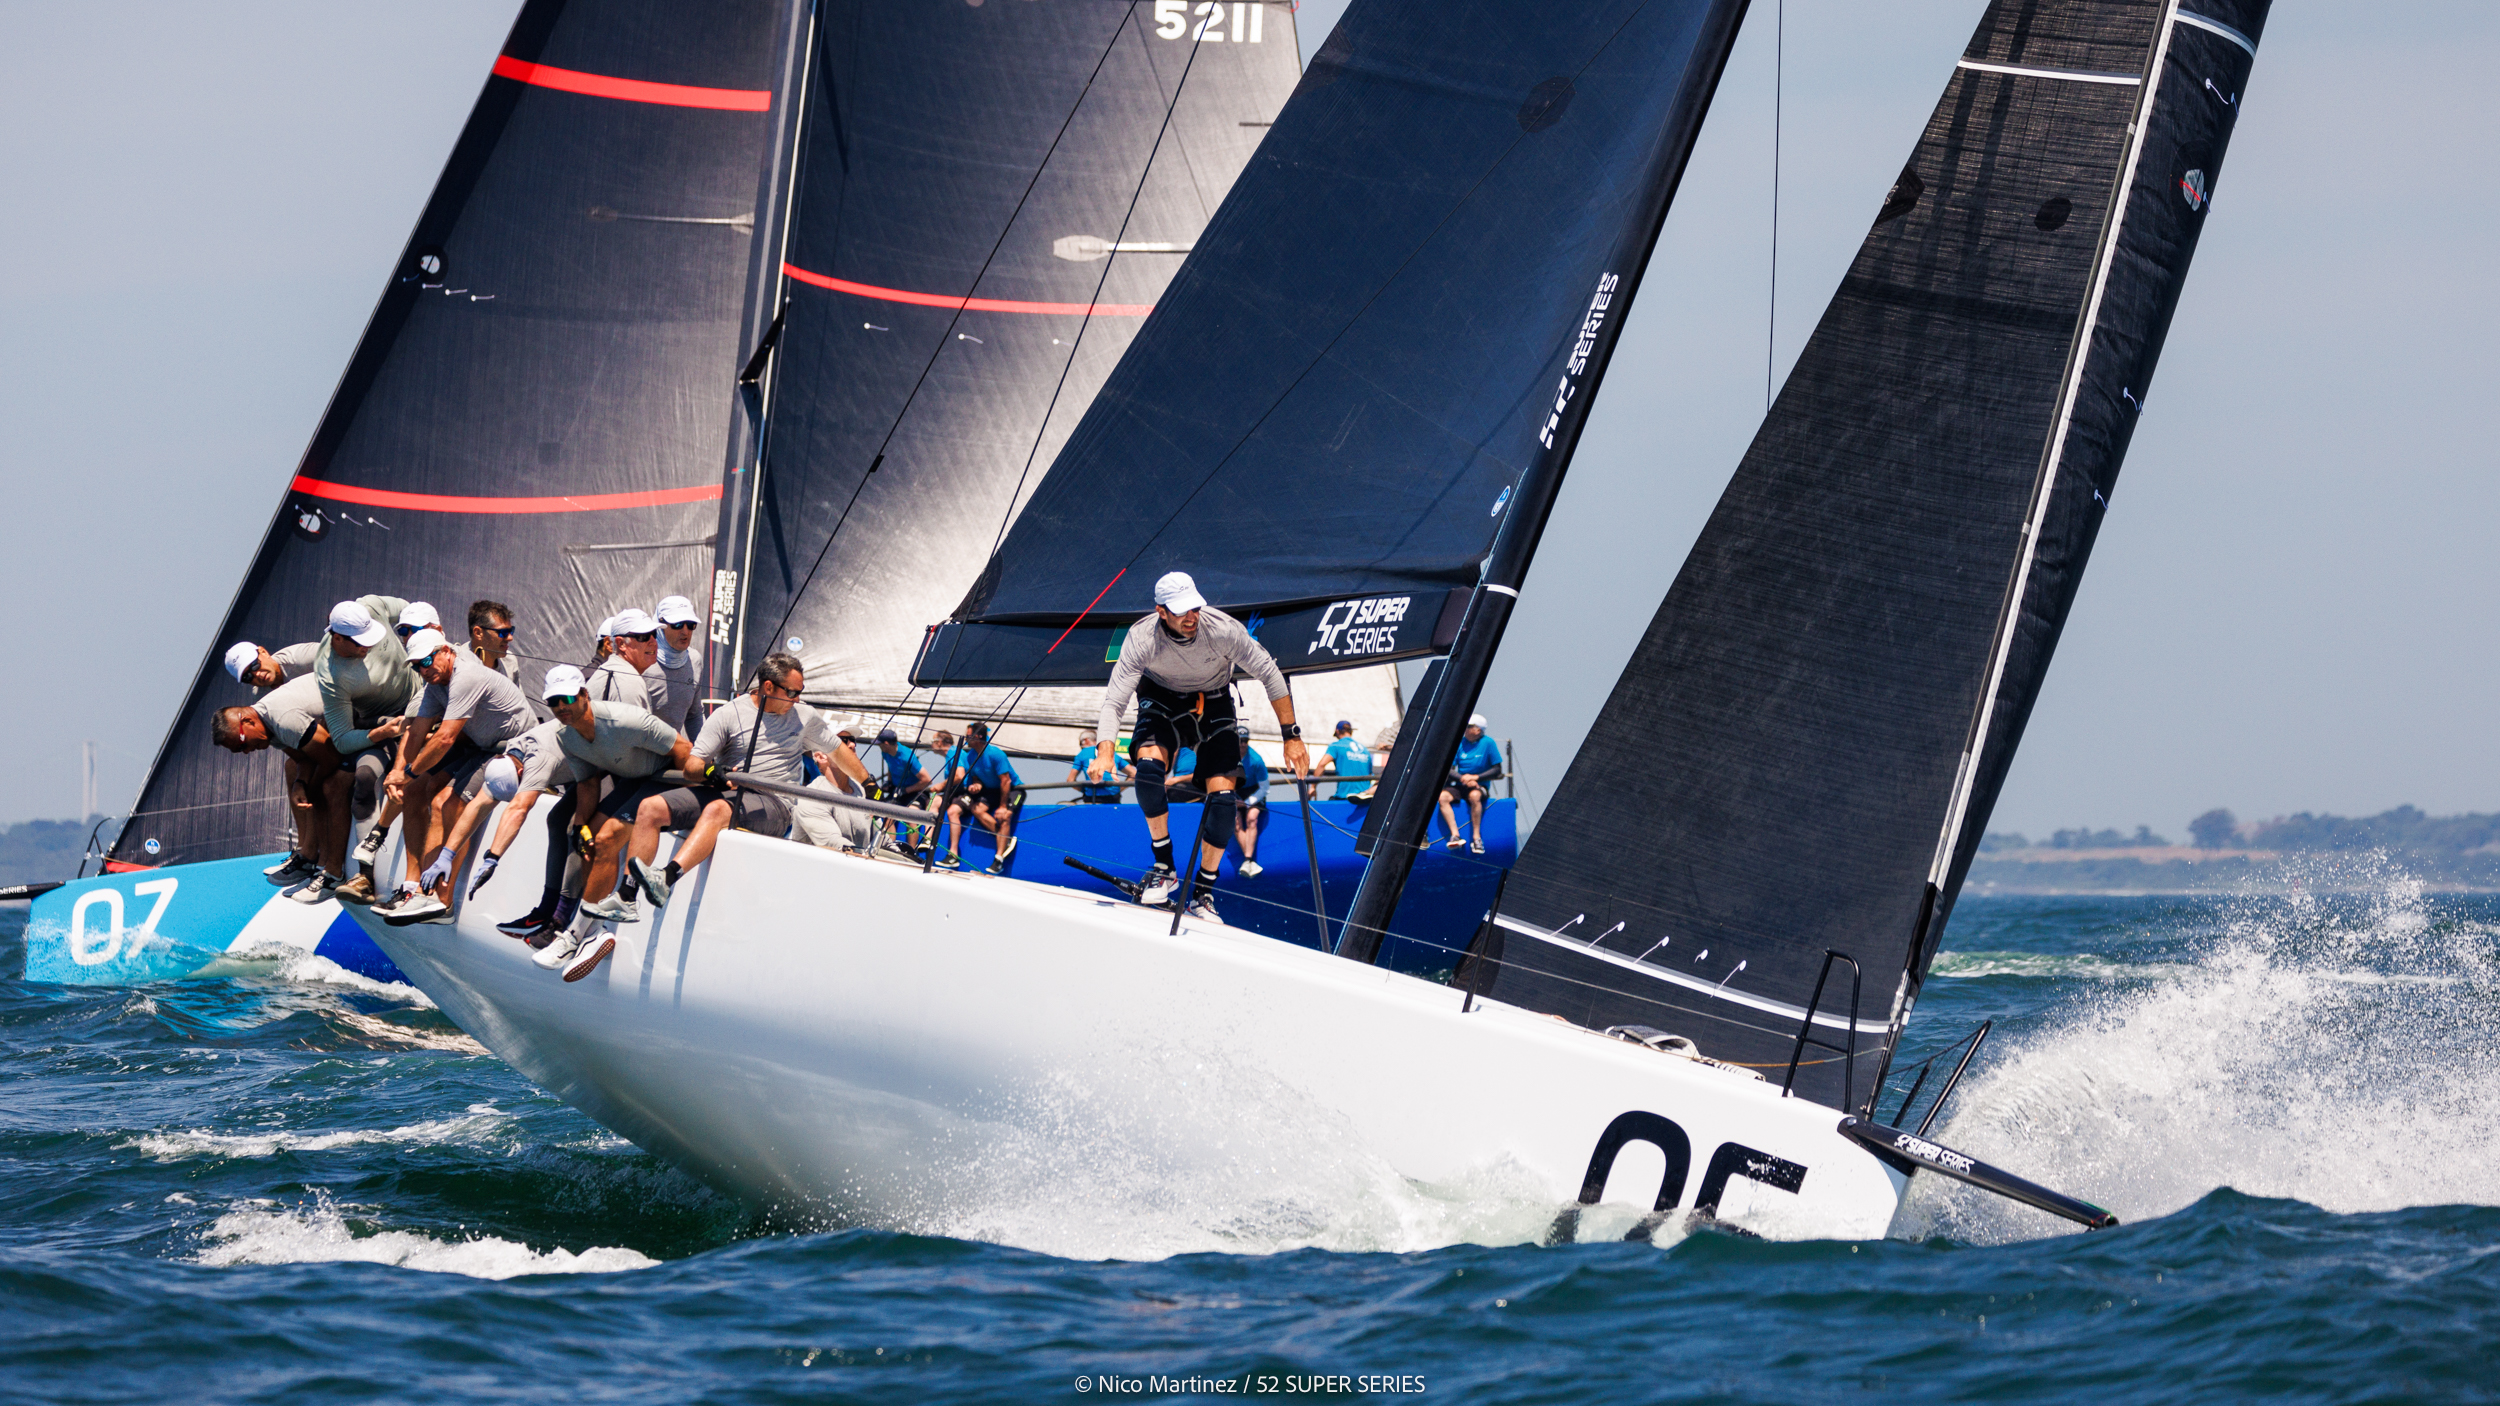 Sled’s unmatched consistency sees them lead Rolex TP52 World Championship